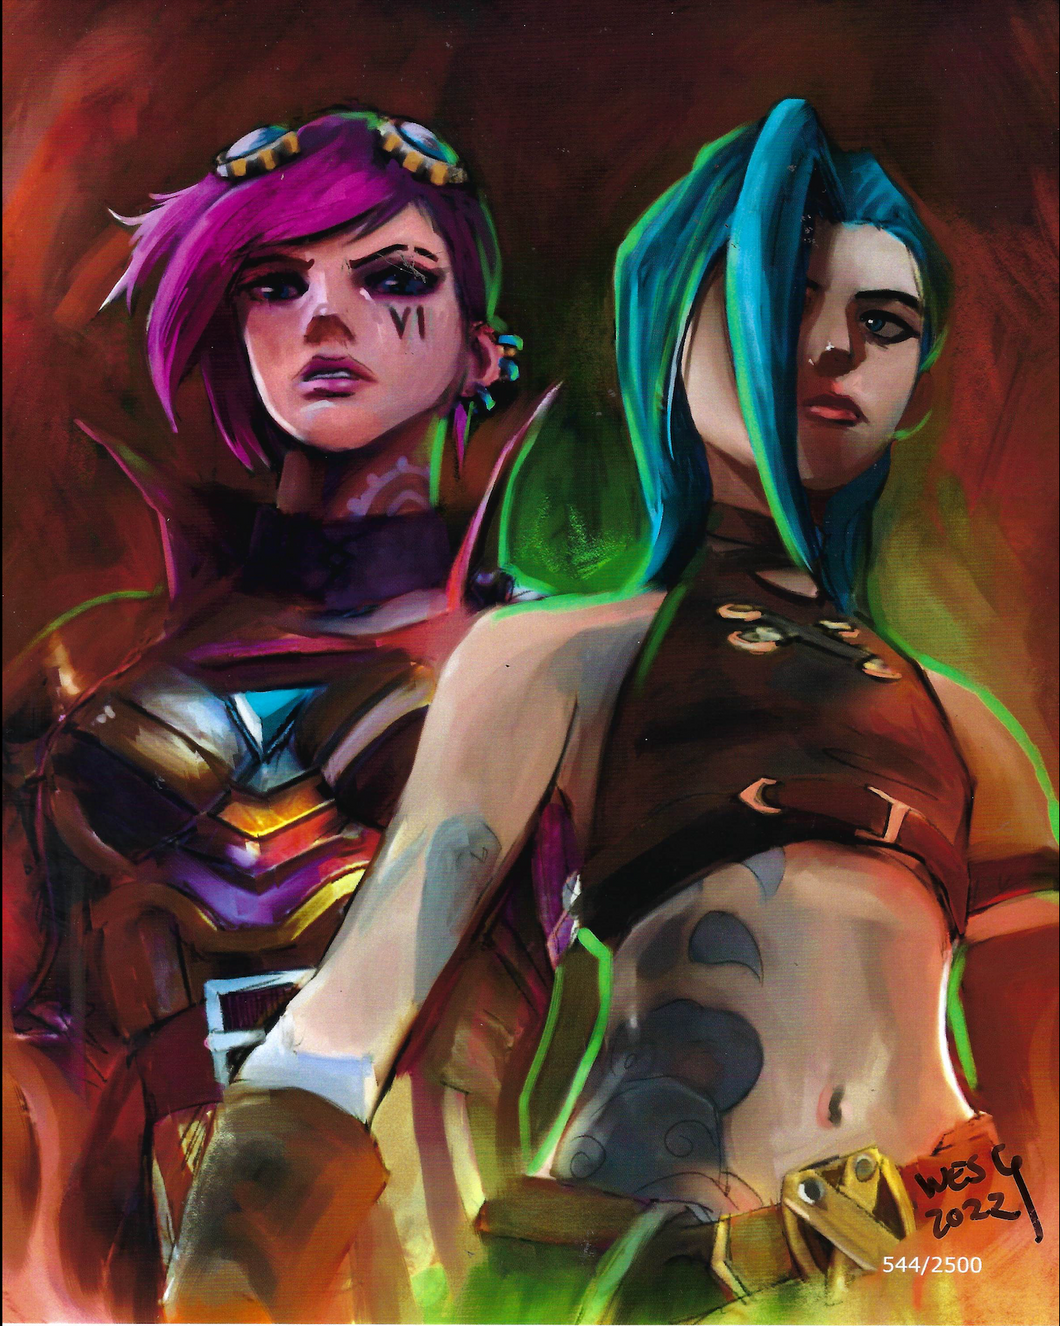 League of Legends 8x10 Art Print Signed by Artist Wesley Gardner (no. 544 of 2500)